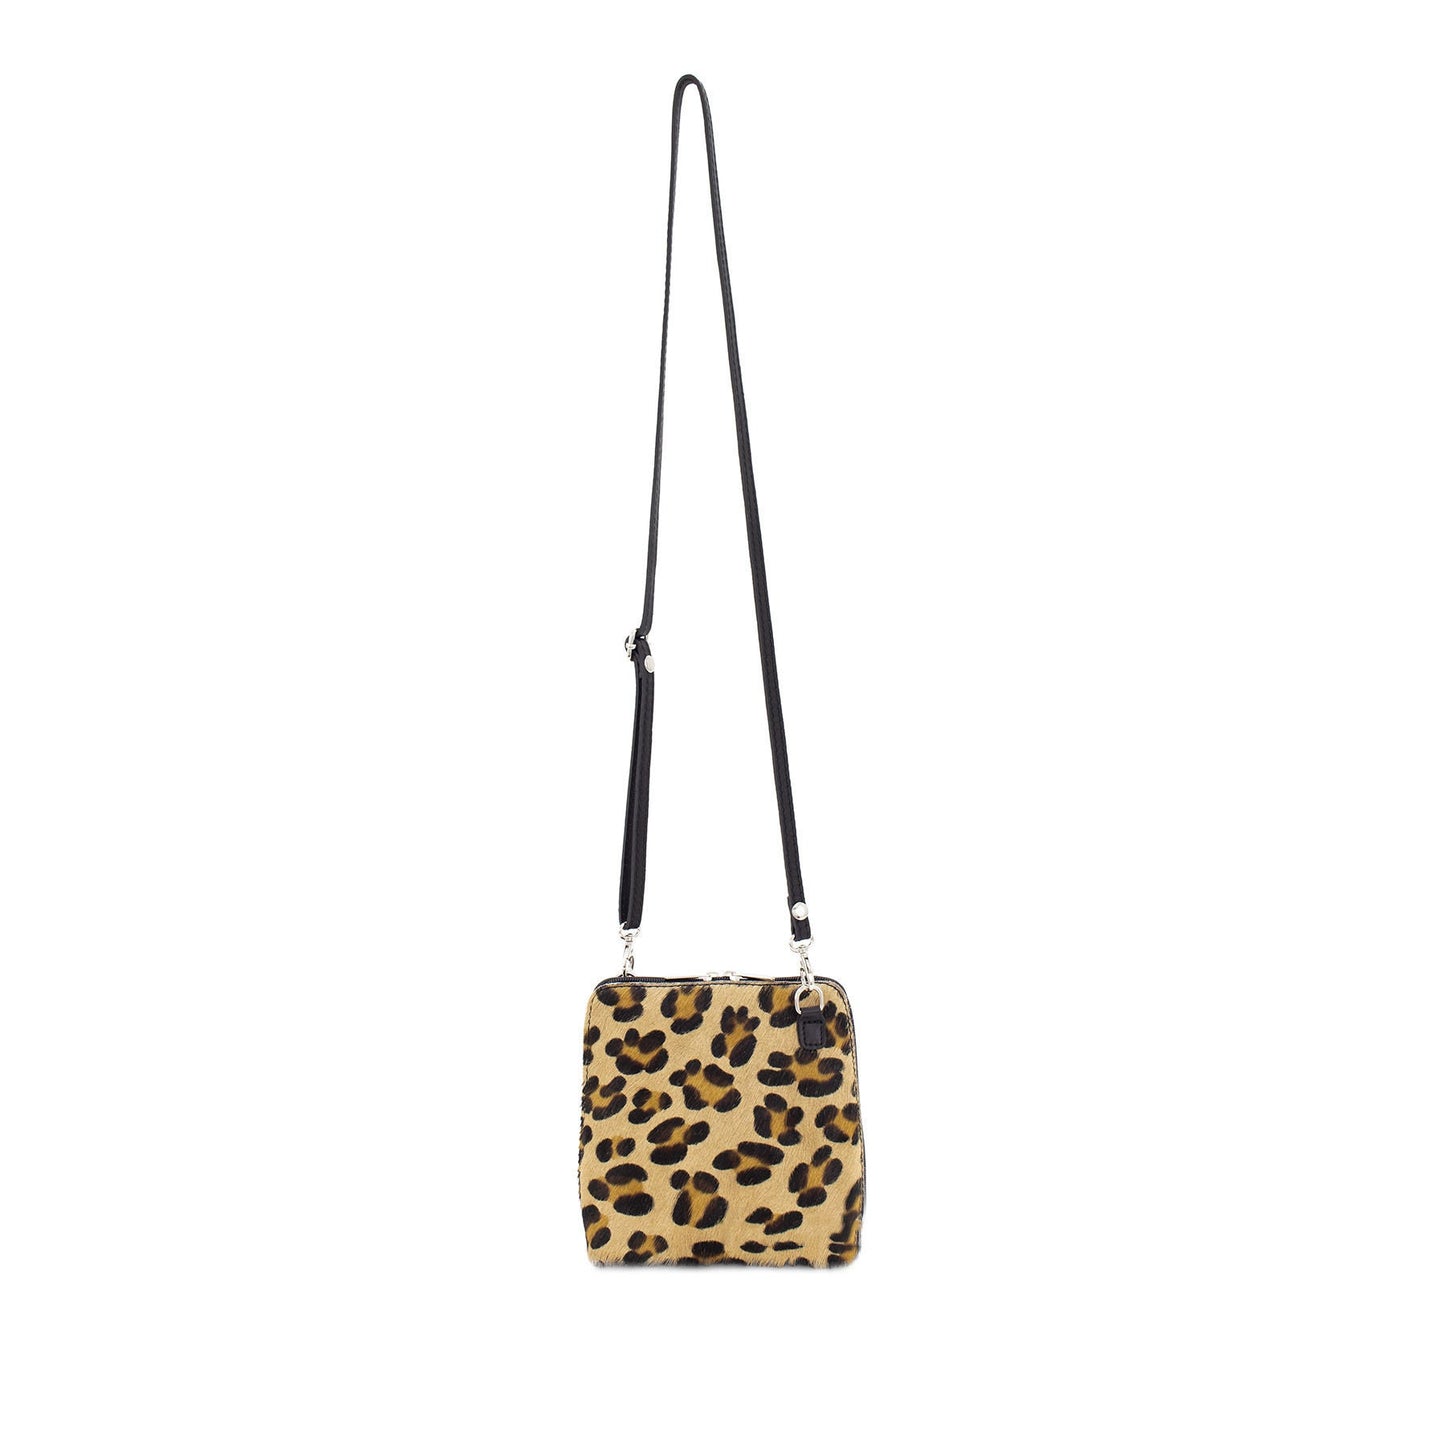 Genuine Suede Leather Animal Print Crossbody Bag VERA PELLE Real Italian Suede Leather Small Crossbody Shoulder Bag Suede Bag Cute Crossbody